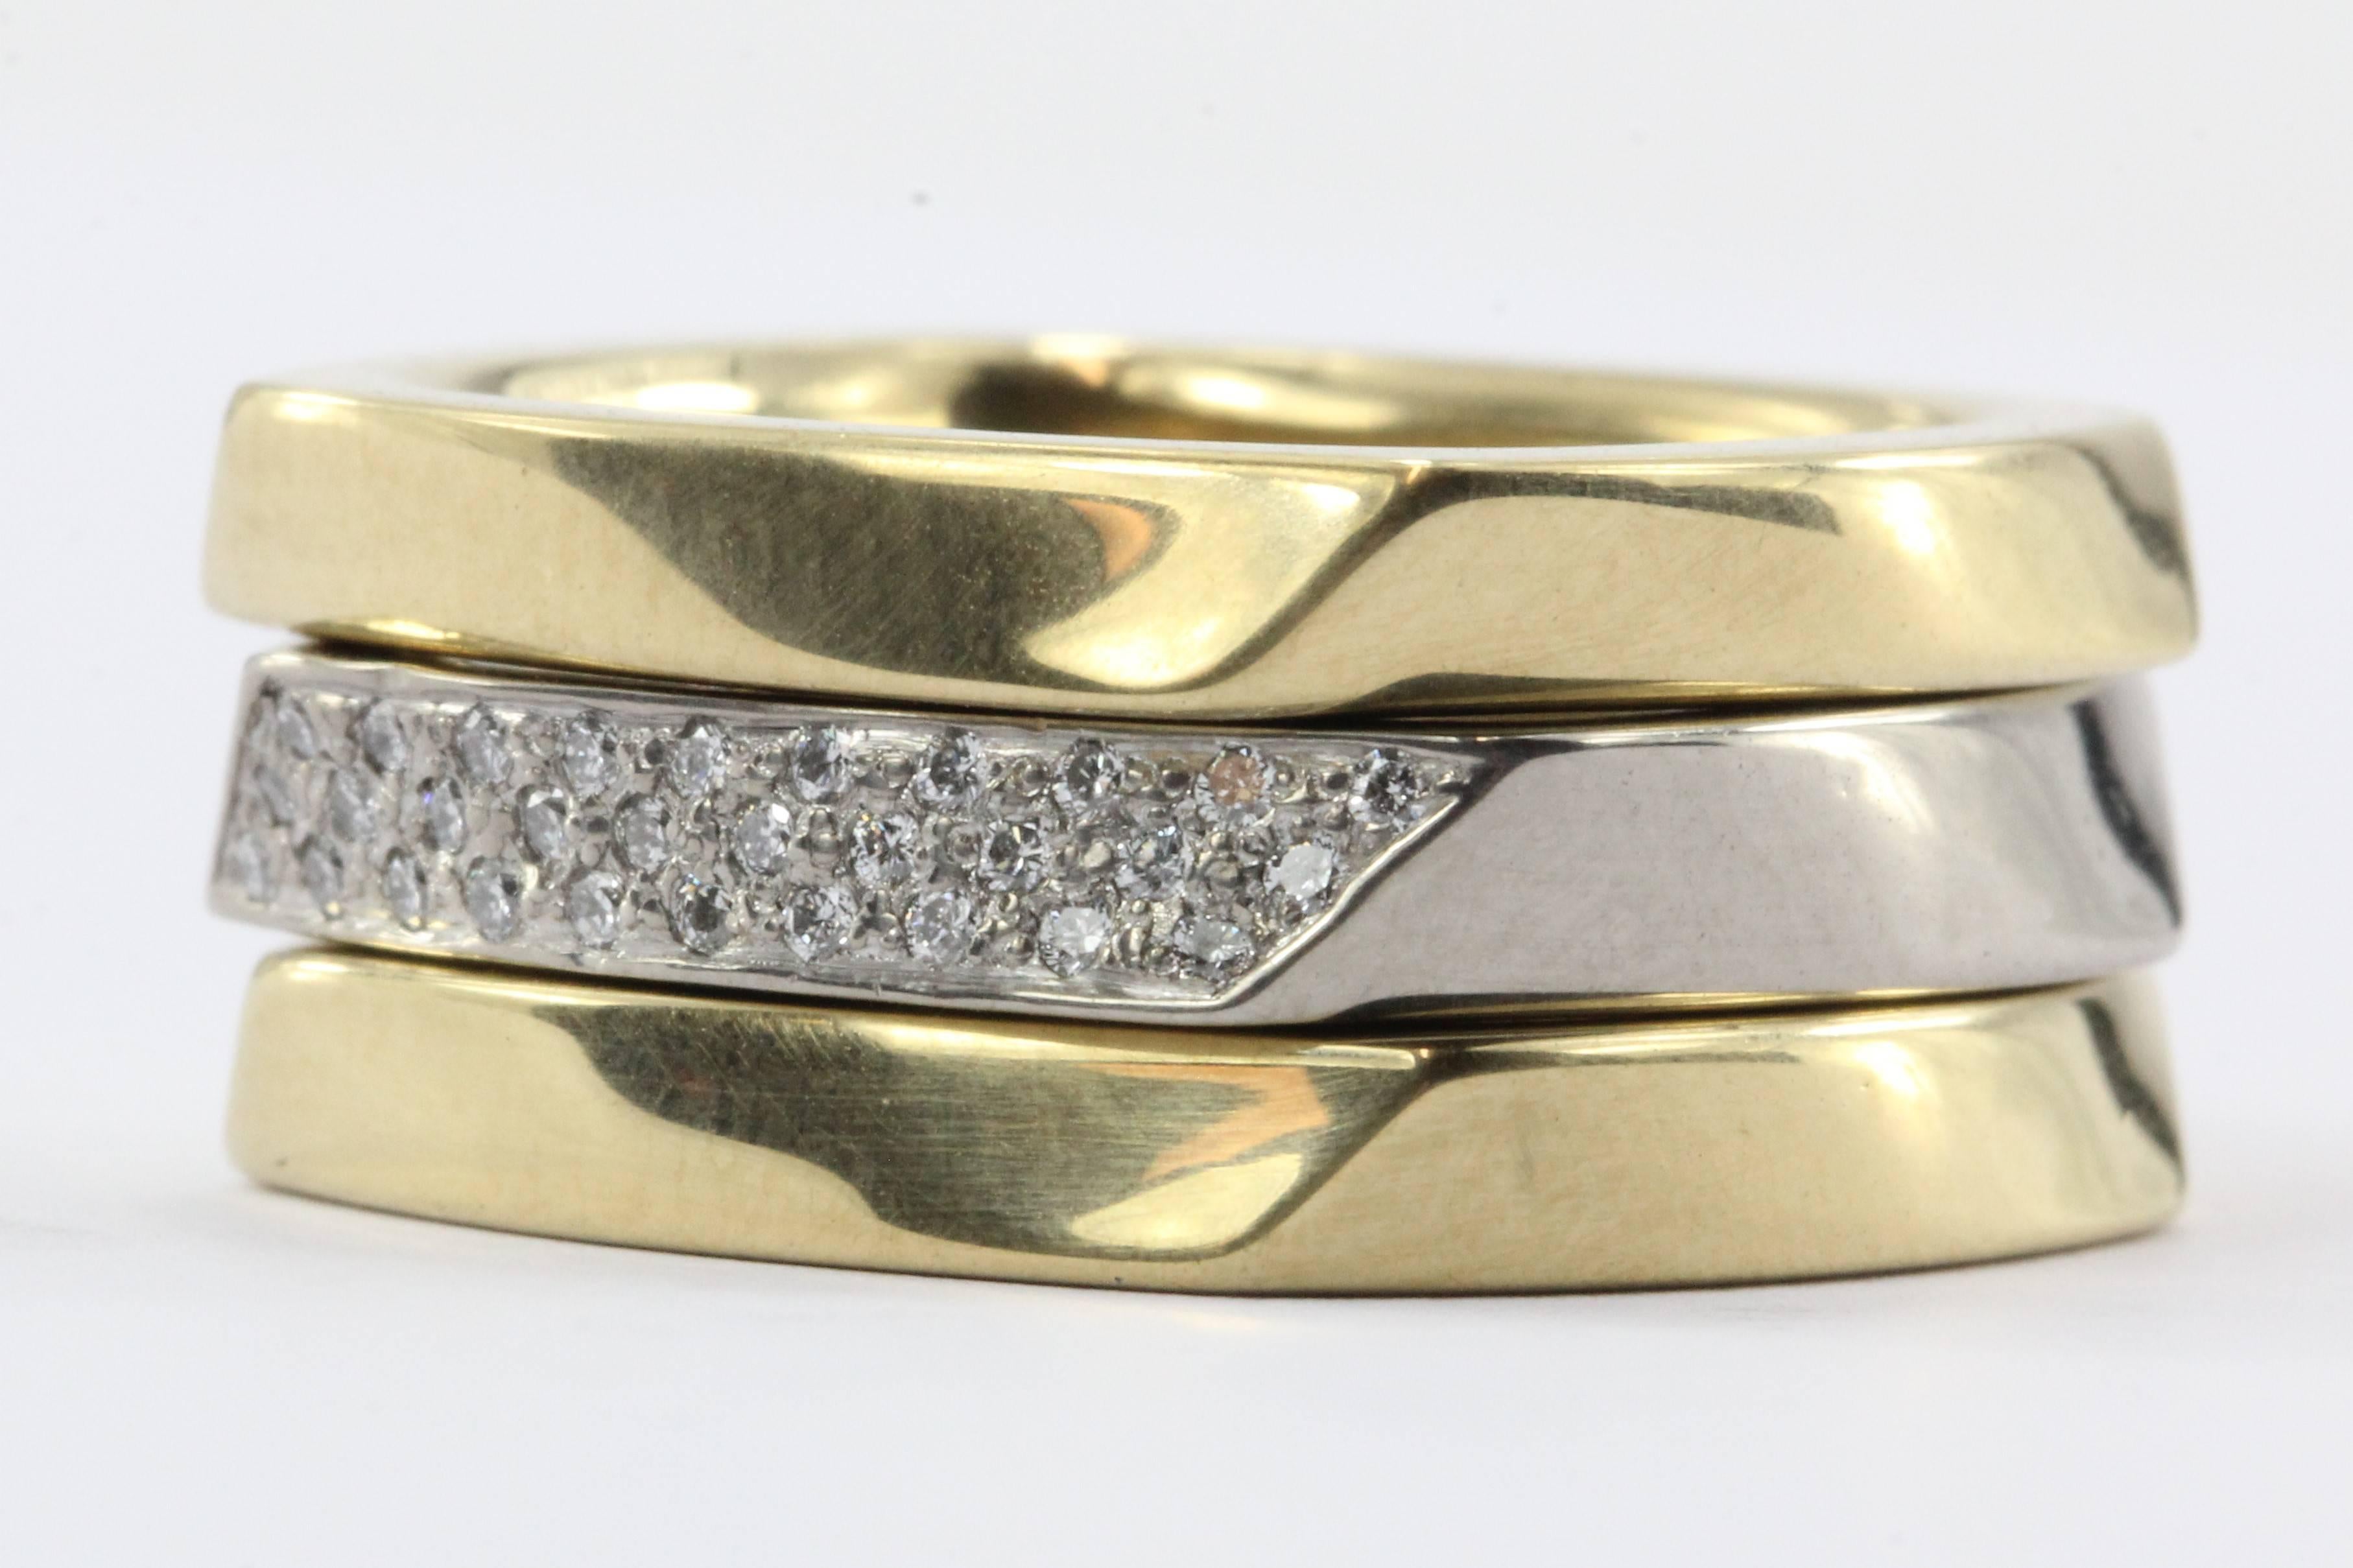 Set of 3 Tiffany & Co 750 18K White & Yellow Gold Frank Gehry Torque Ring Bands. The rings are in excellent estate condition and ready to wear. They were all just professionally buffed and polished and have no signs of wear. They come in their